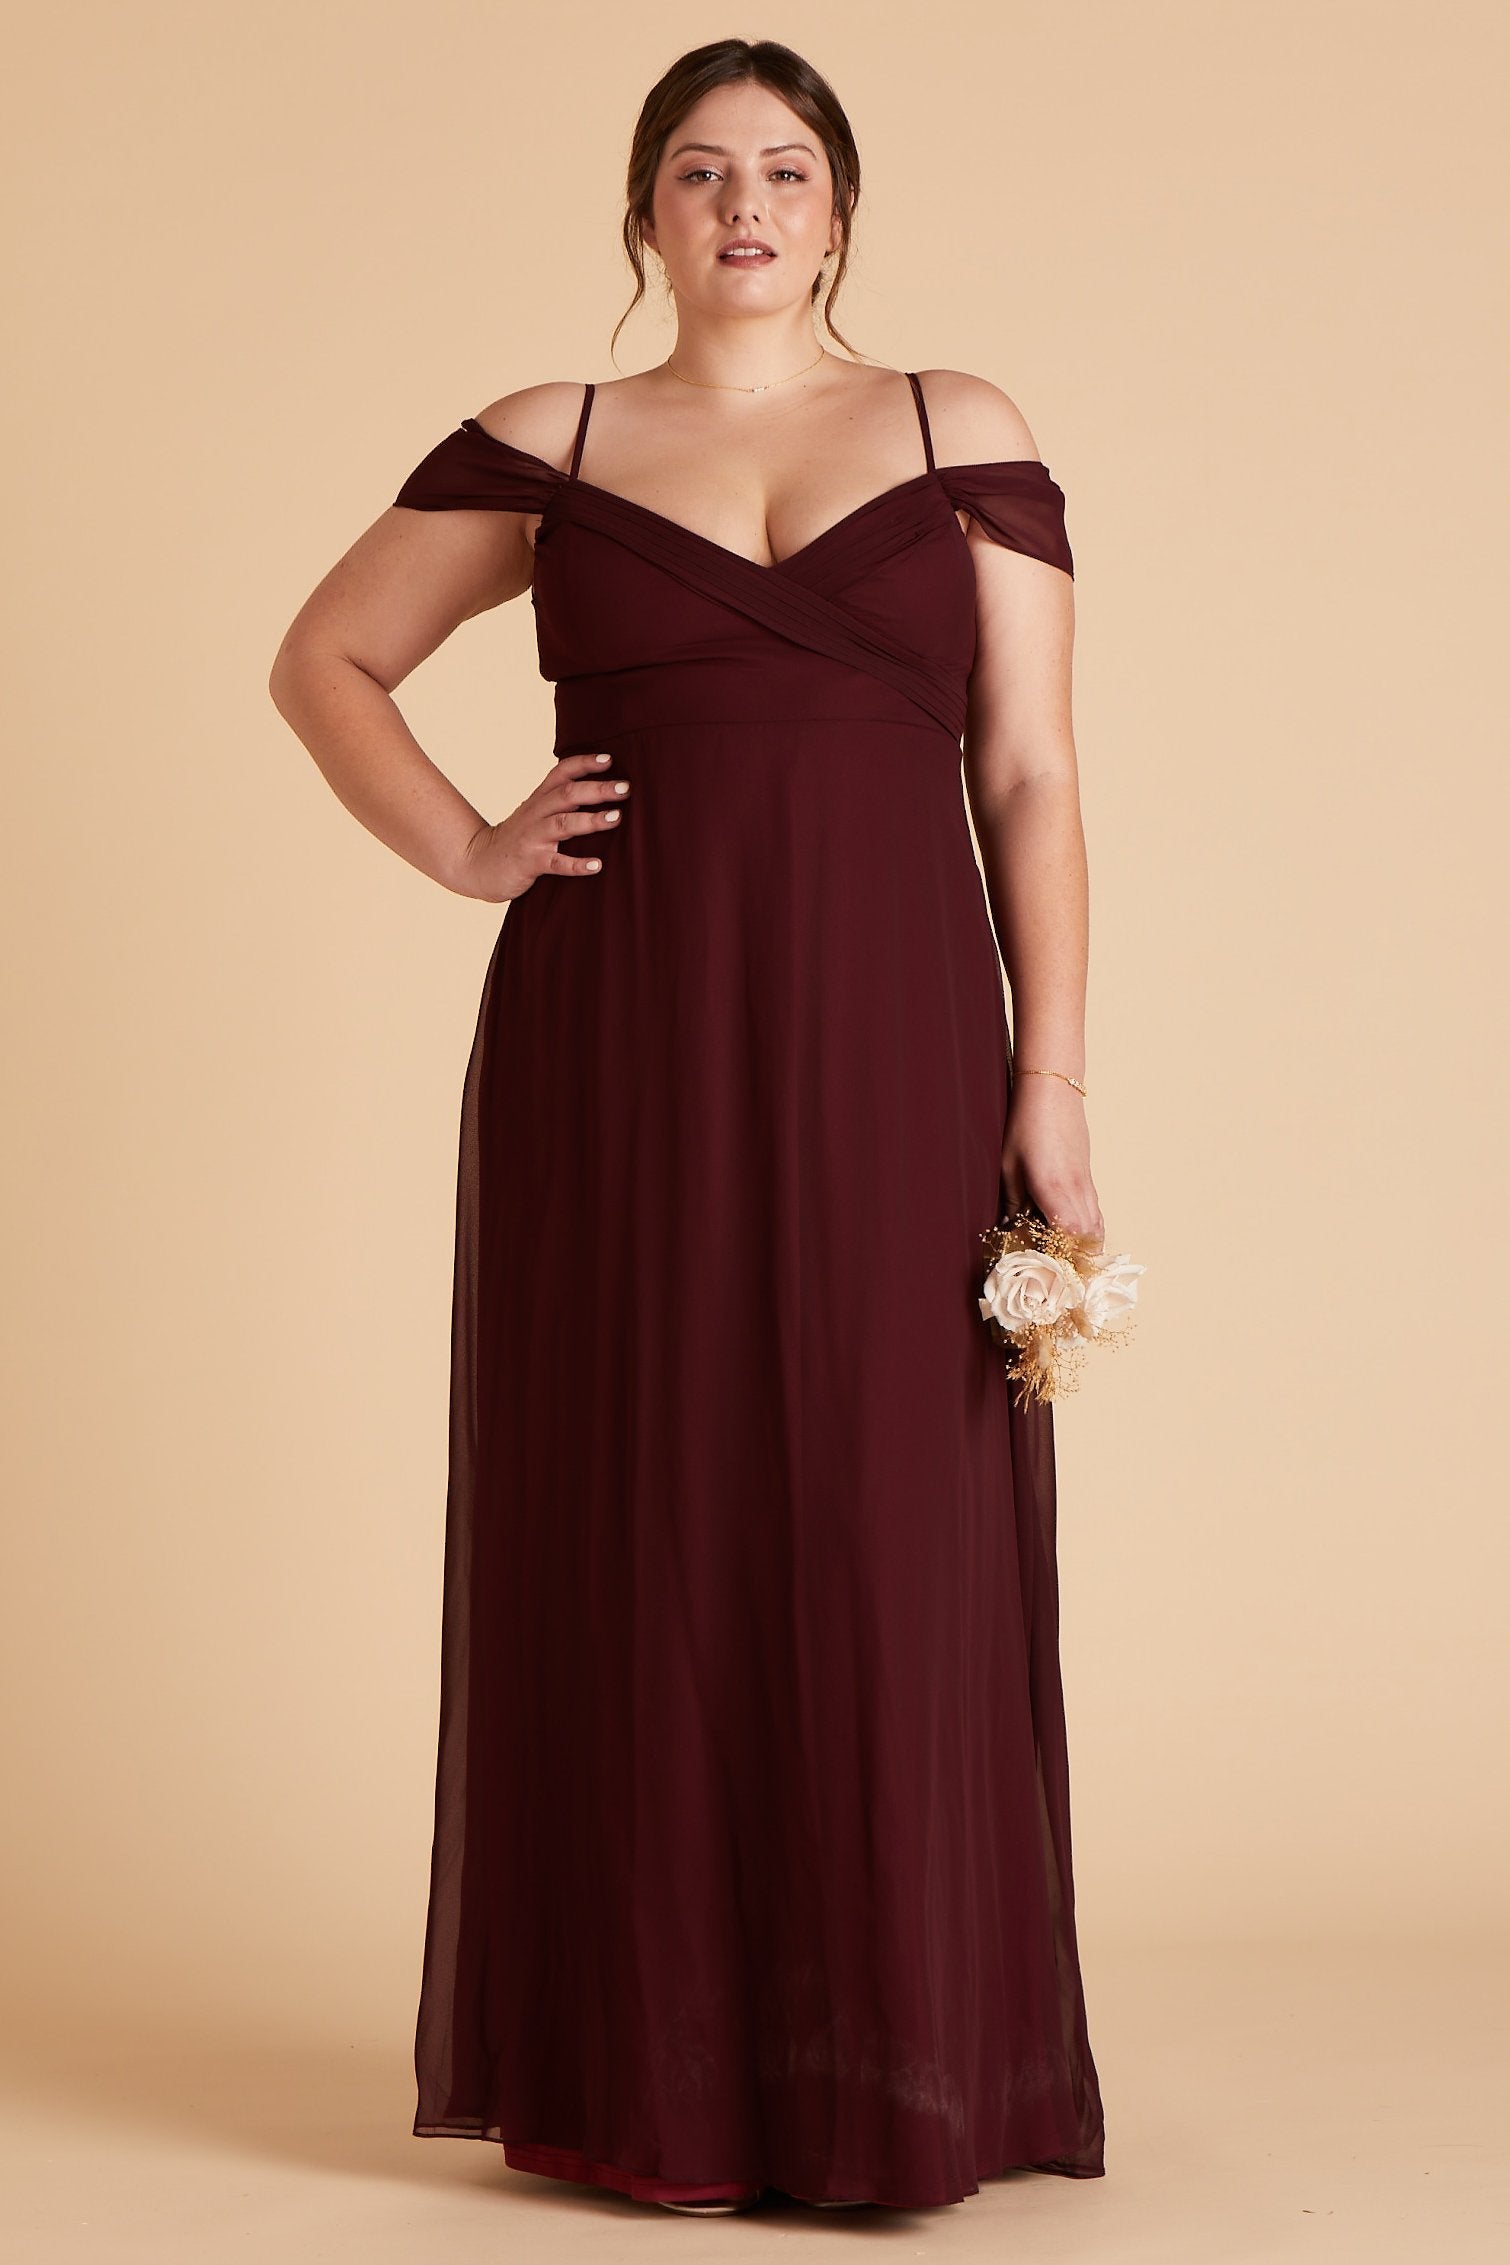 Spence convertible plus size bridesmaid dress in cabernet burgundy chiffon by Birdy Grey, front view